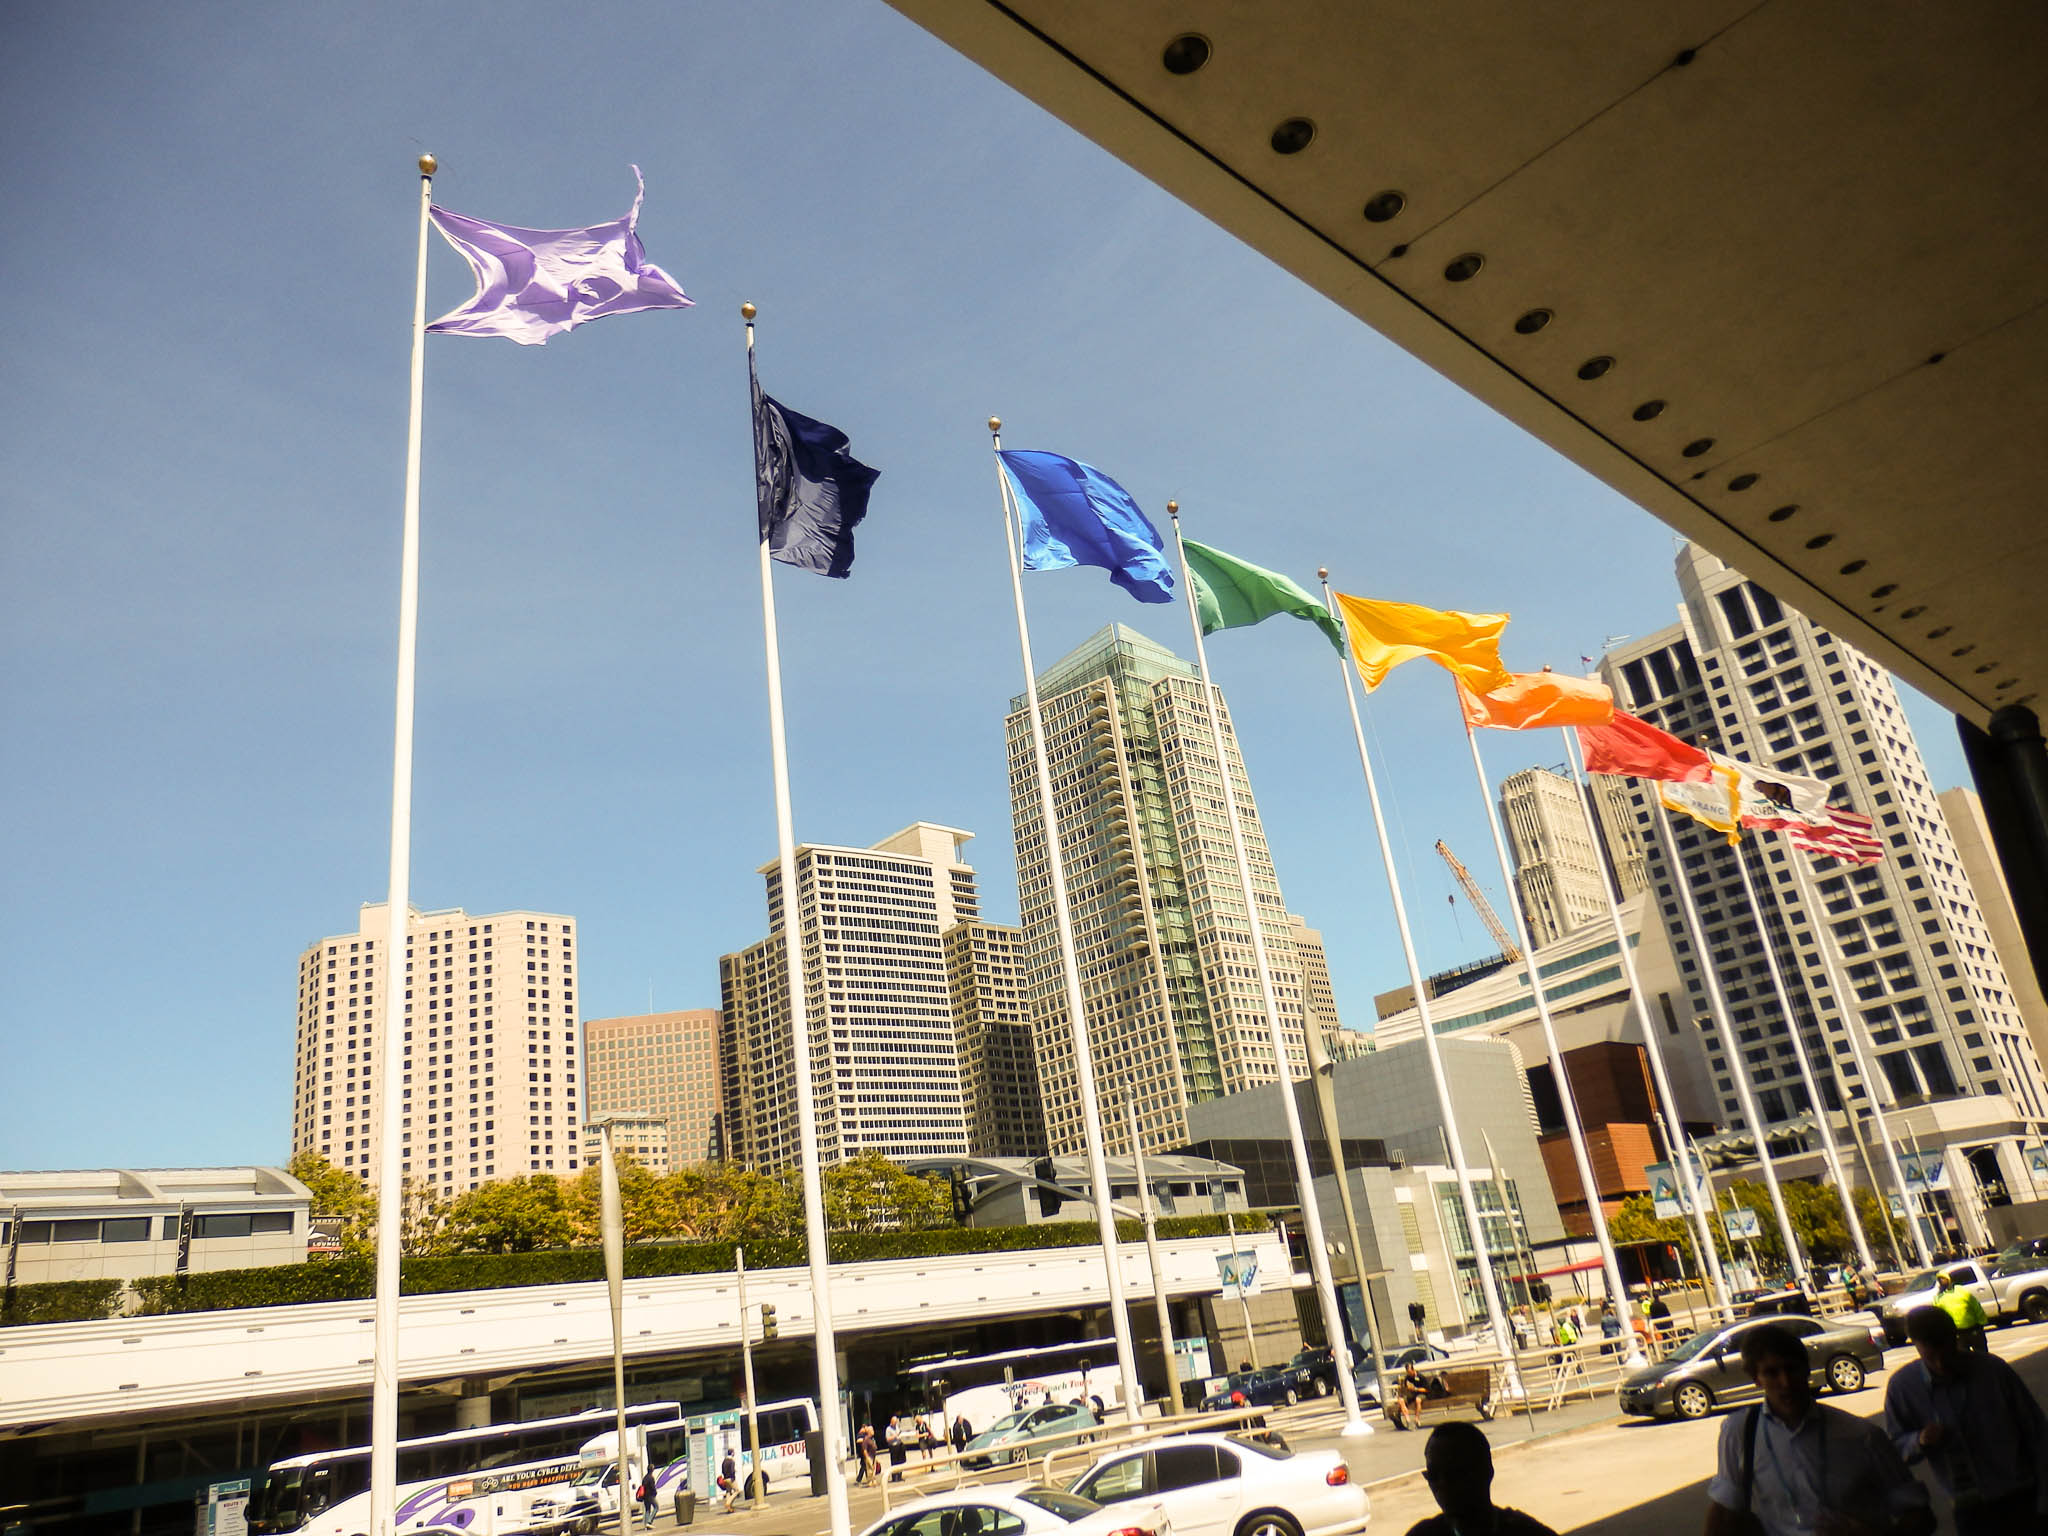 Impressions from outside the Moscone Center South